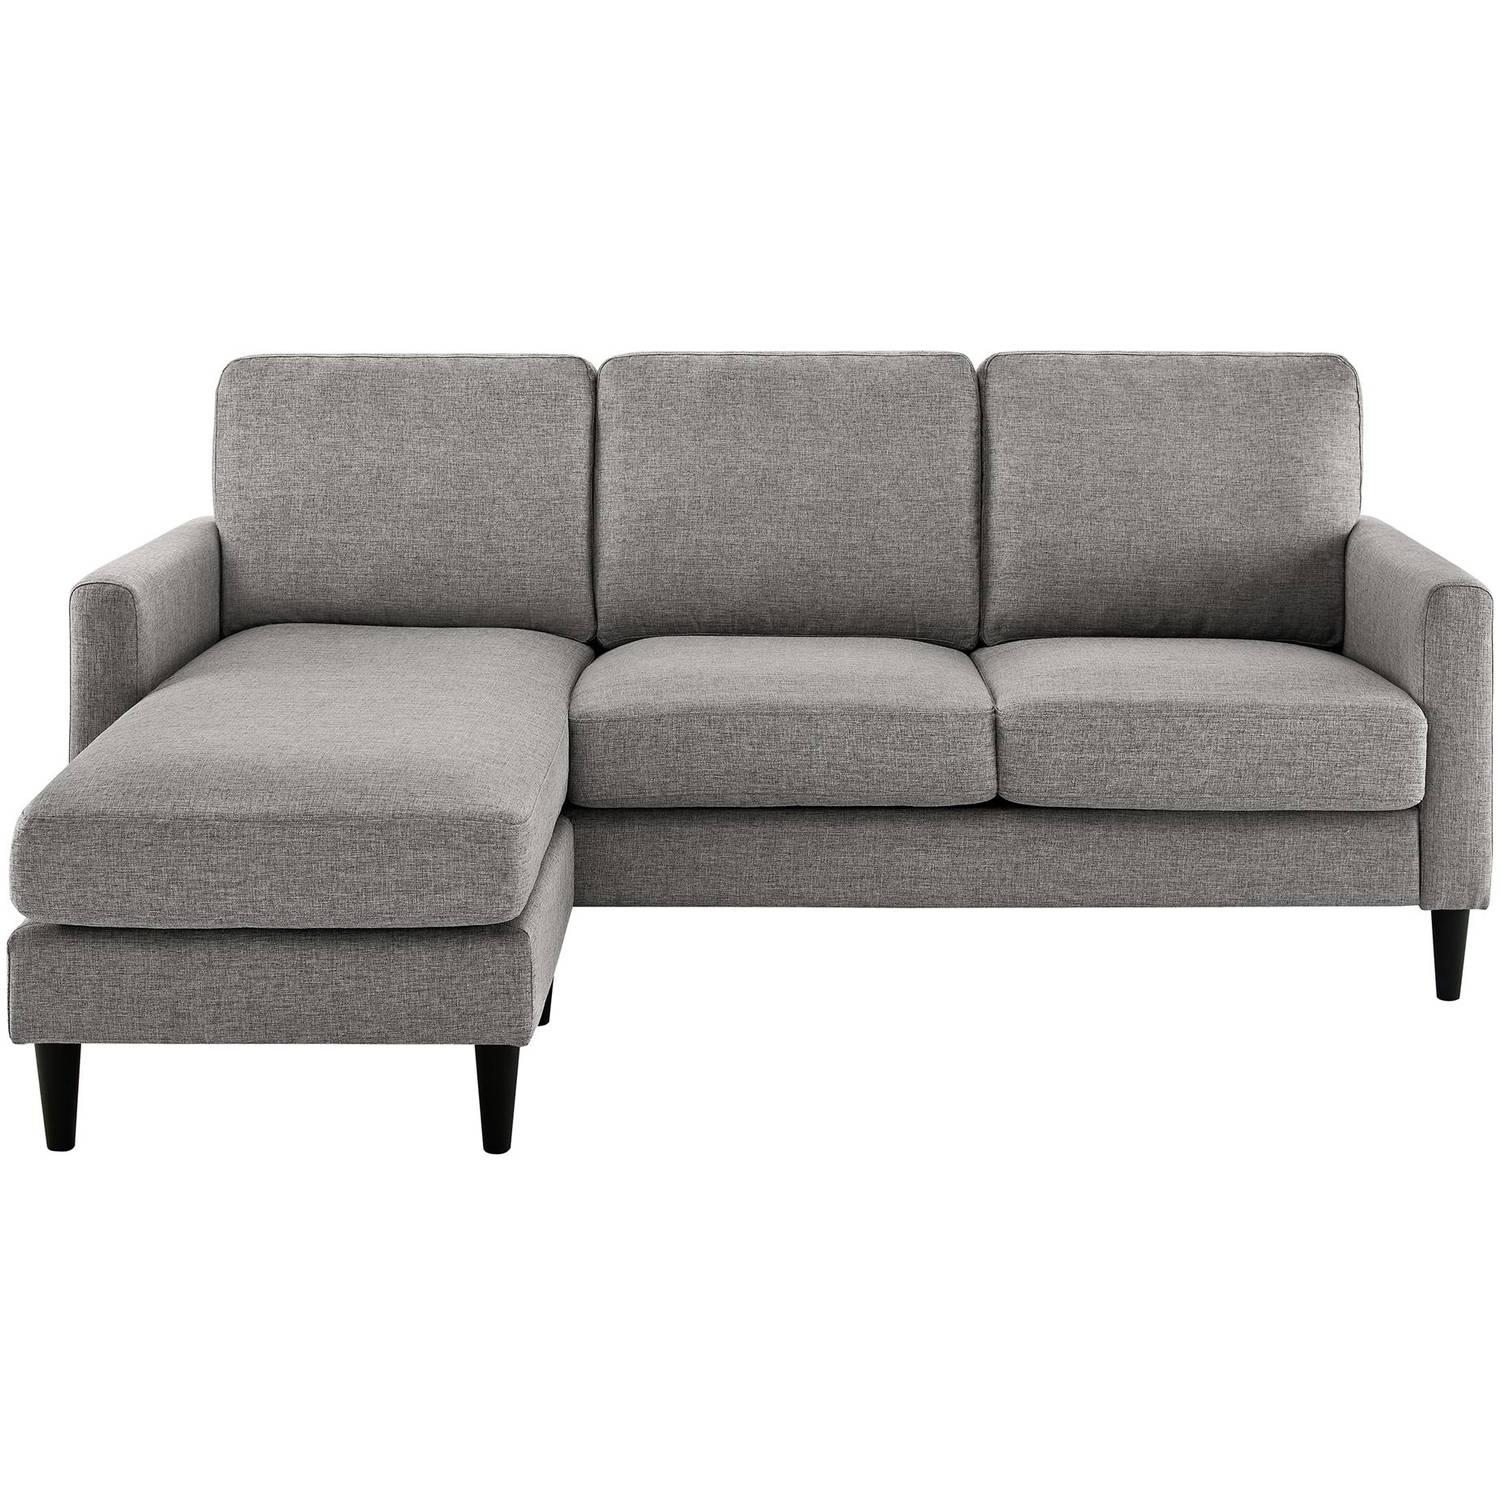 Dorel Living Kaci Reversible Contemporary Upholstered Sectional, Gray - image 5 of 10